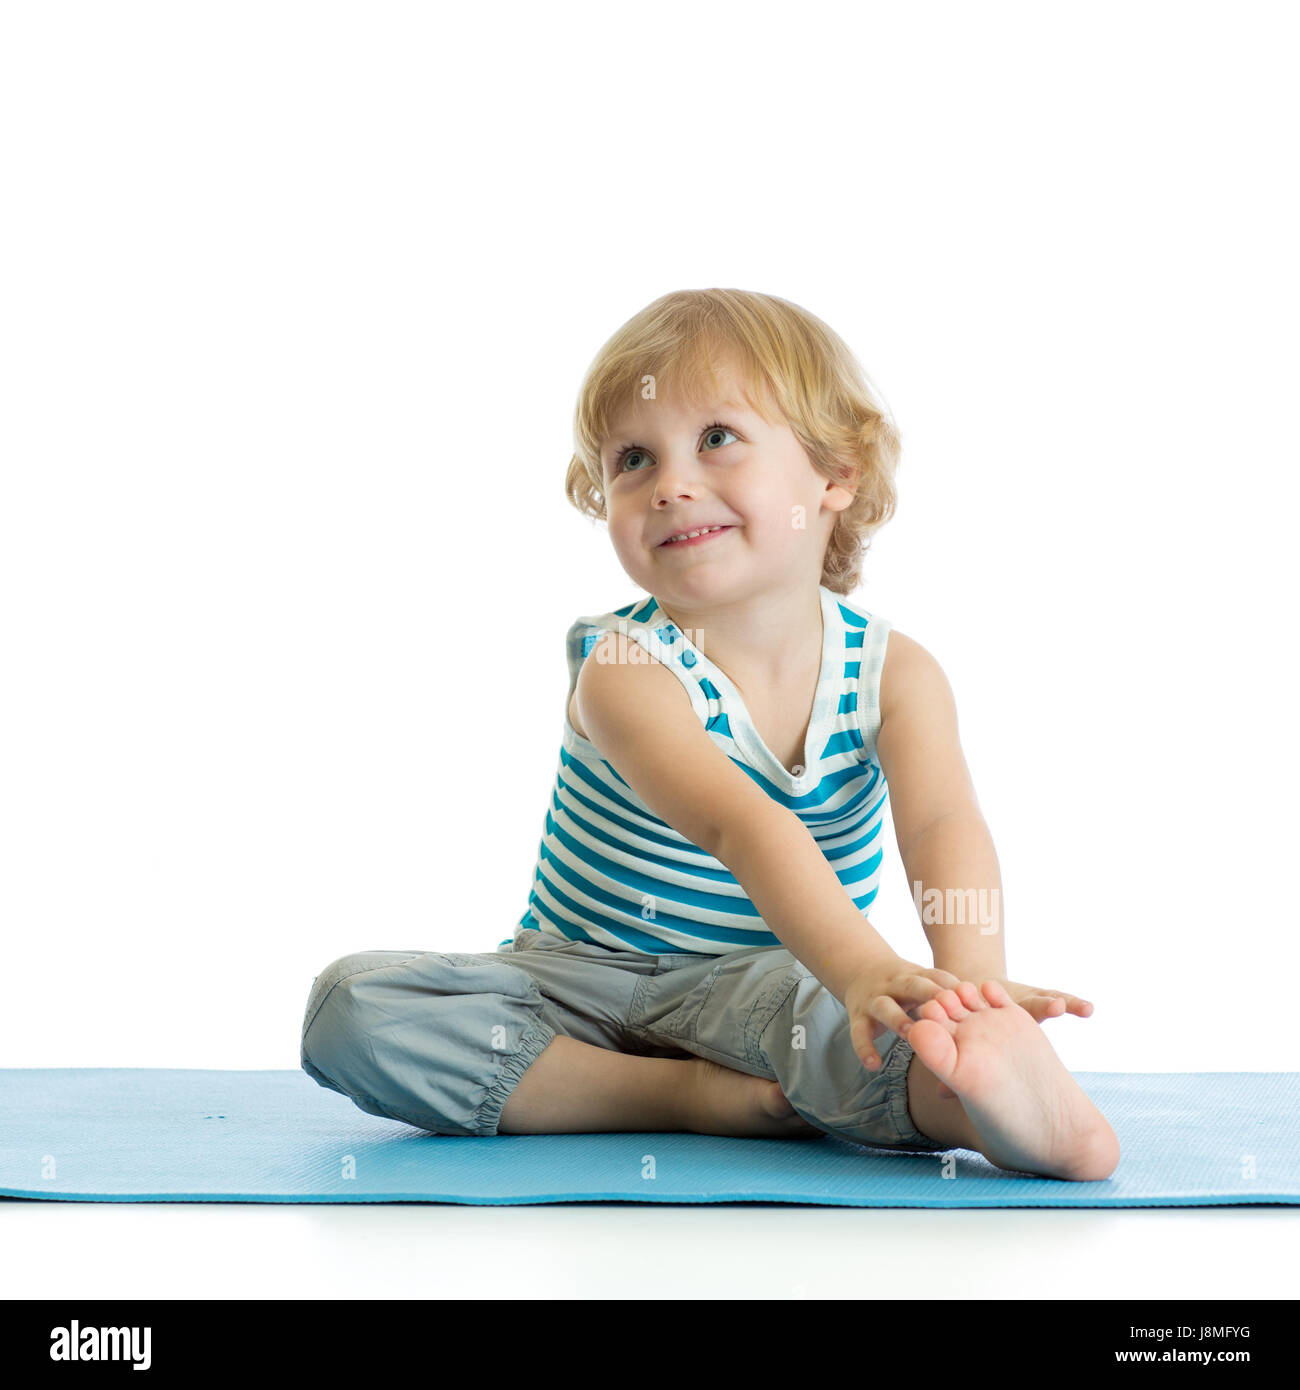 Child boy practicing yoga, stretching in exercise. Kid isolated over white background Stock Photo